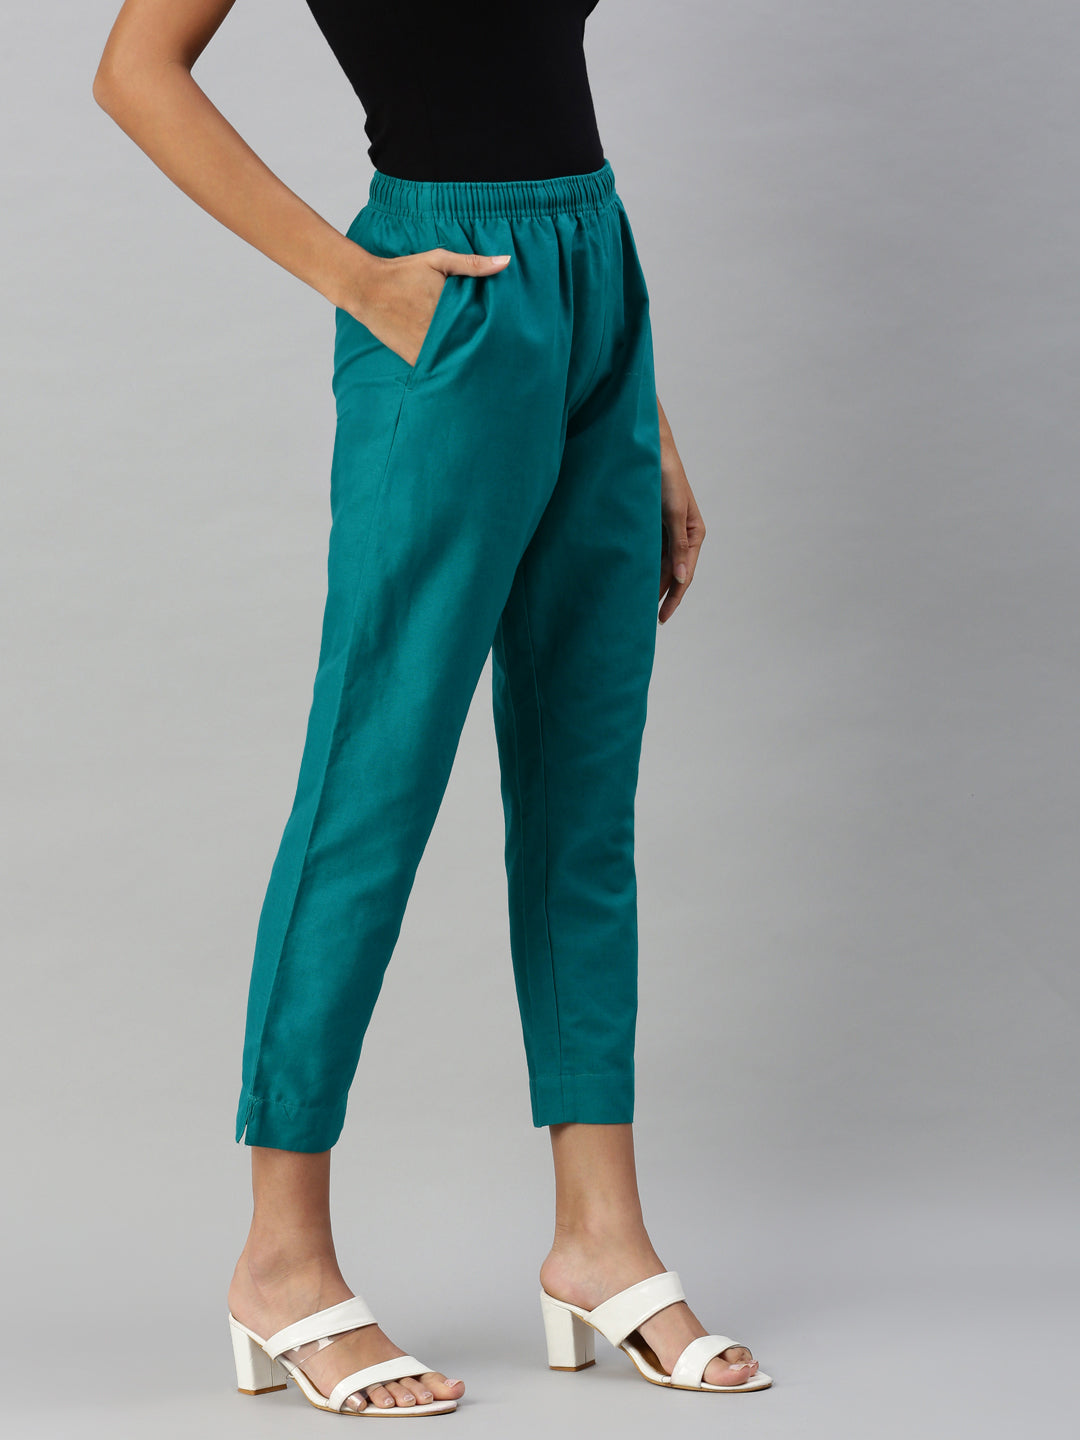 Buy Turquoise Cotton Pants | AQSH-006/PSKY43OCT | The loom